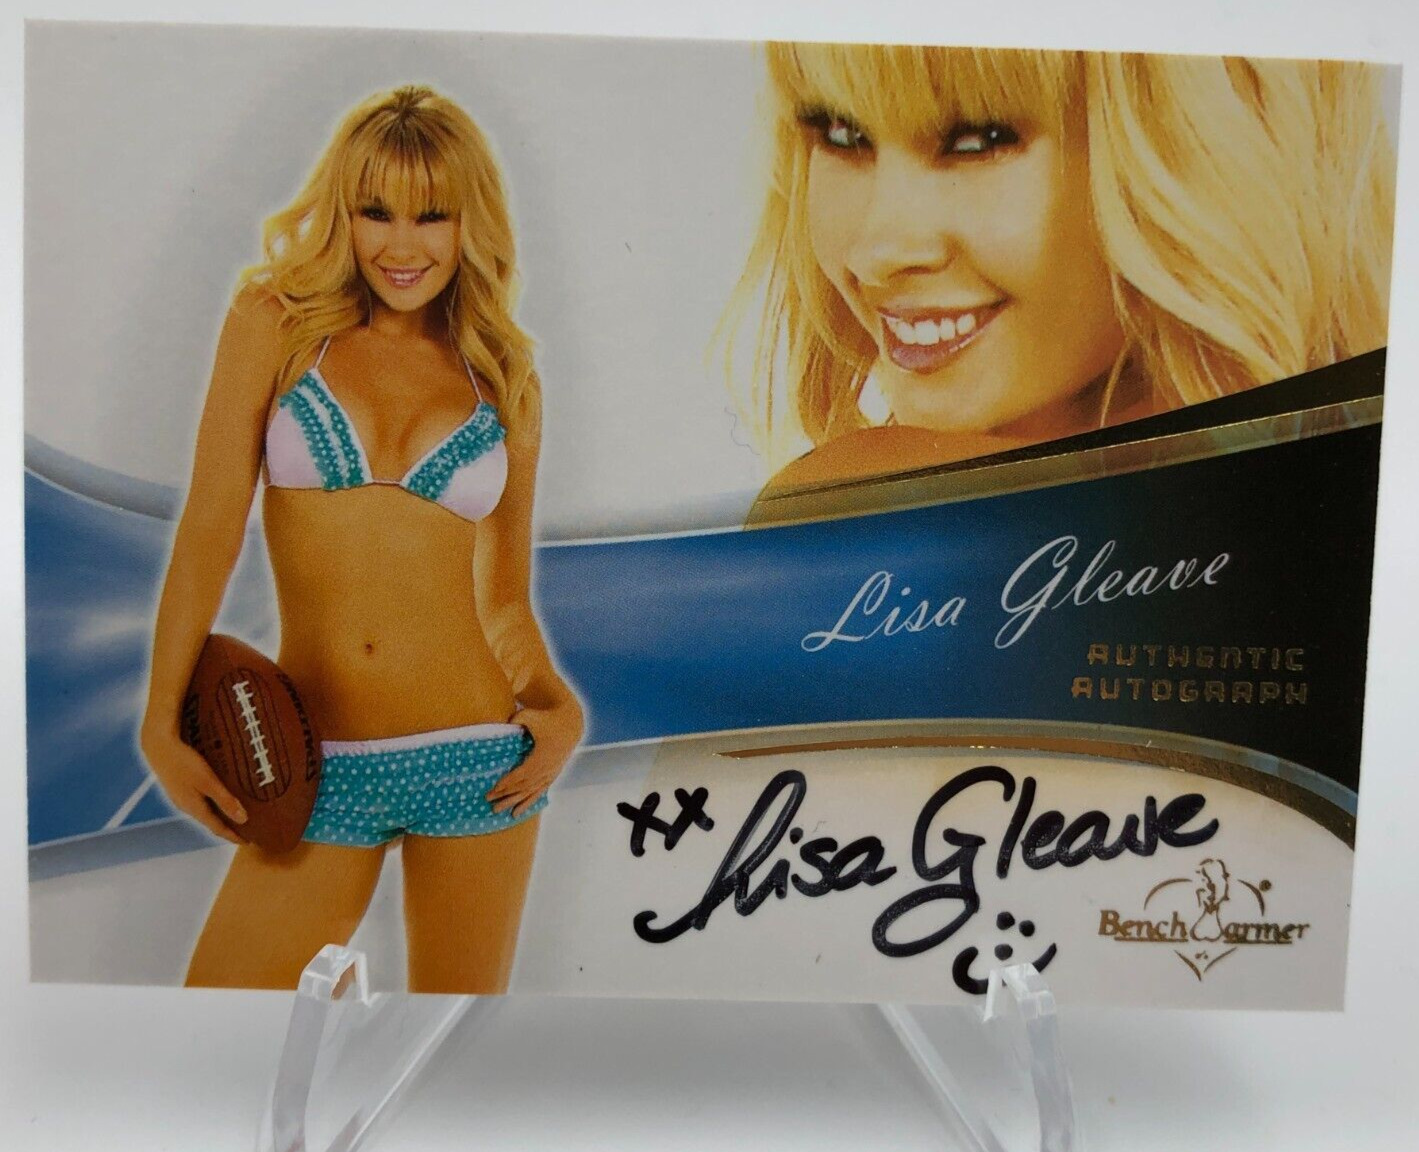 2013 LISA GLEAVE AUTO Signed BENCHWARMER Card The PRICE IS RIGHT BARKER\'S BEAUTY